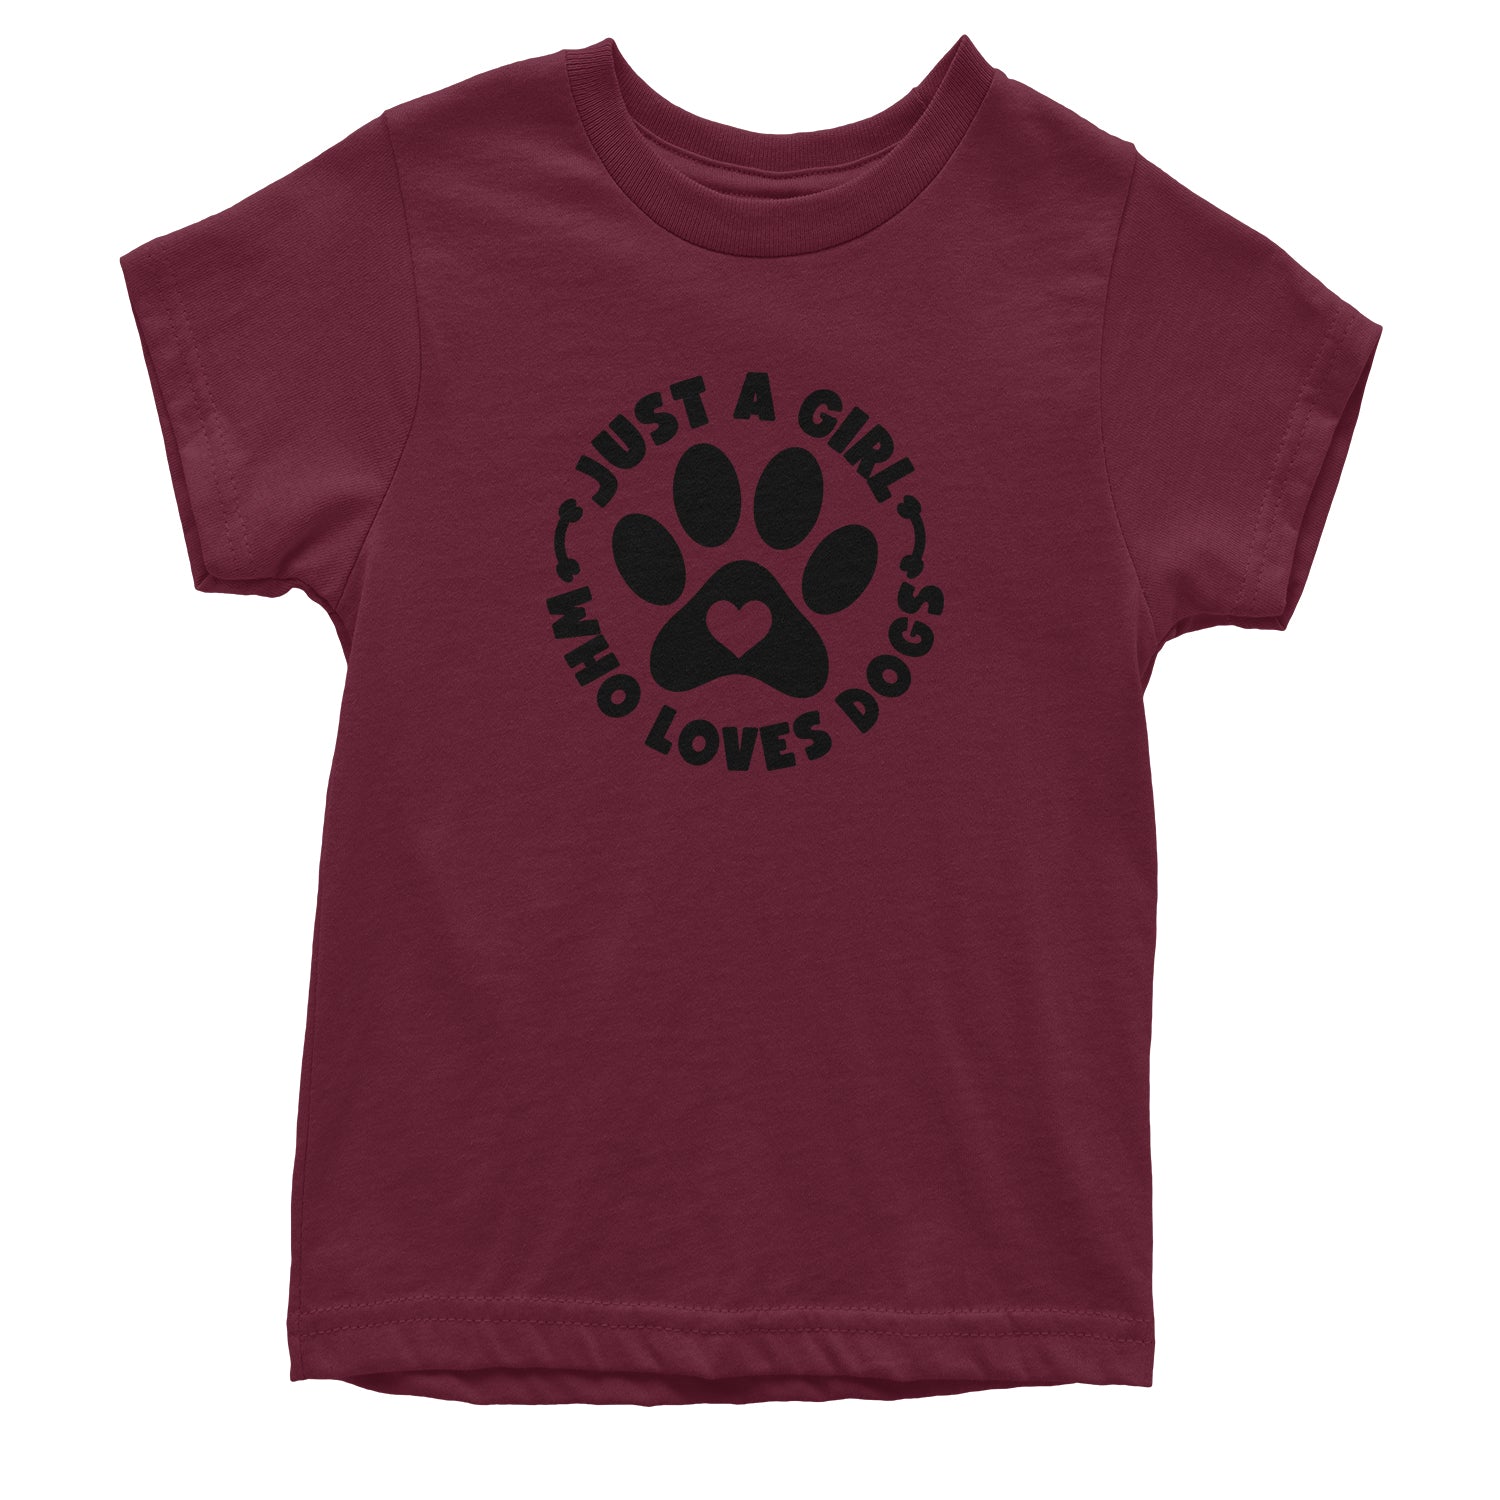 Dogs Just A Girl Who Loves DOGS Youth T-shirt dog, puppy, rescue by Expression Tees